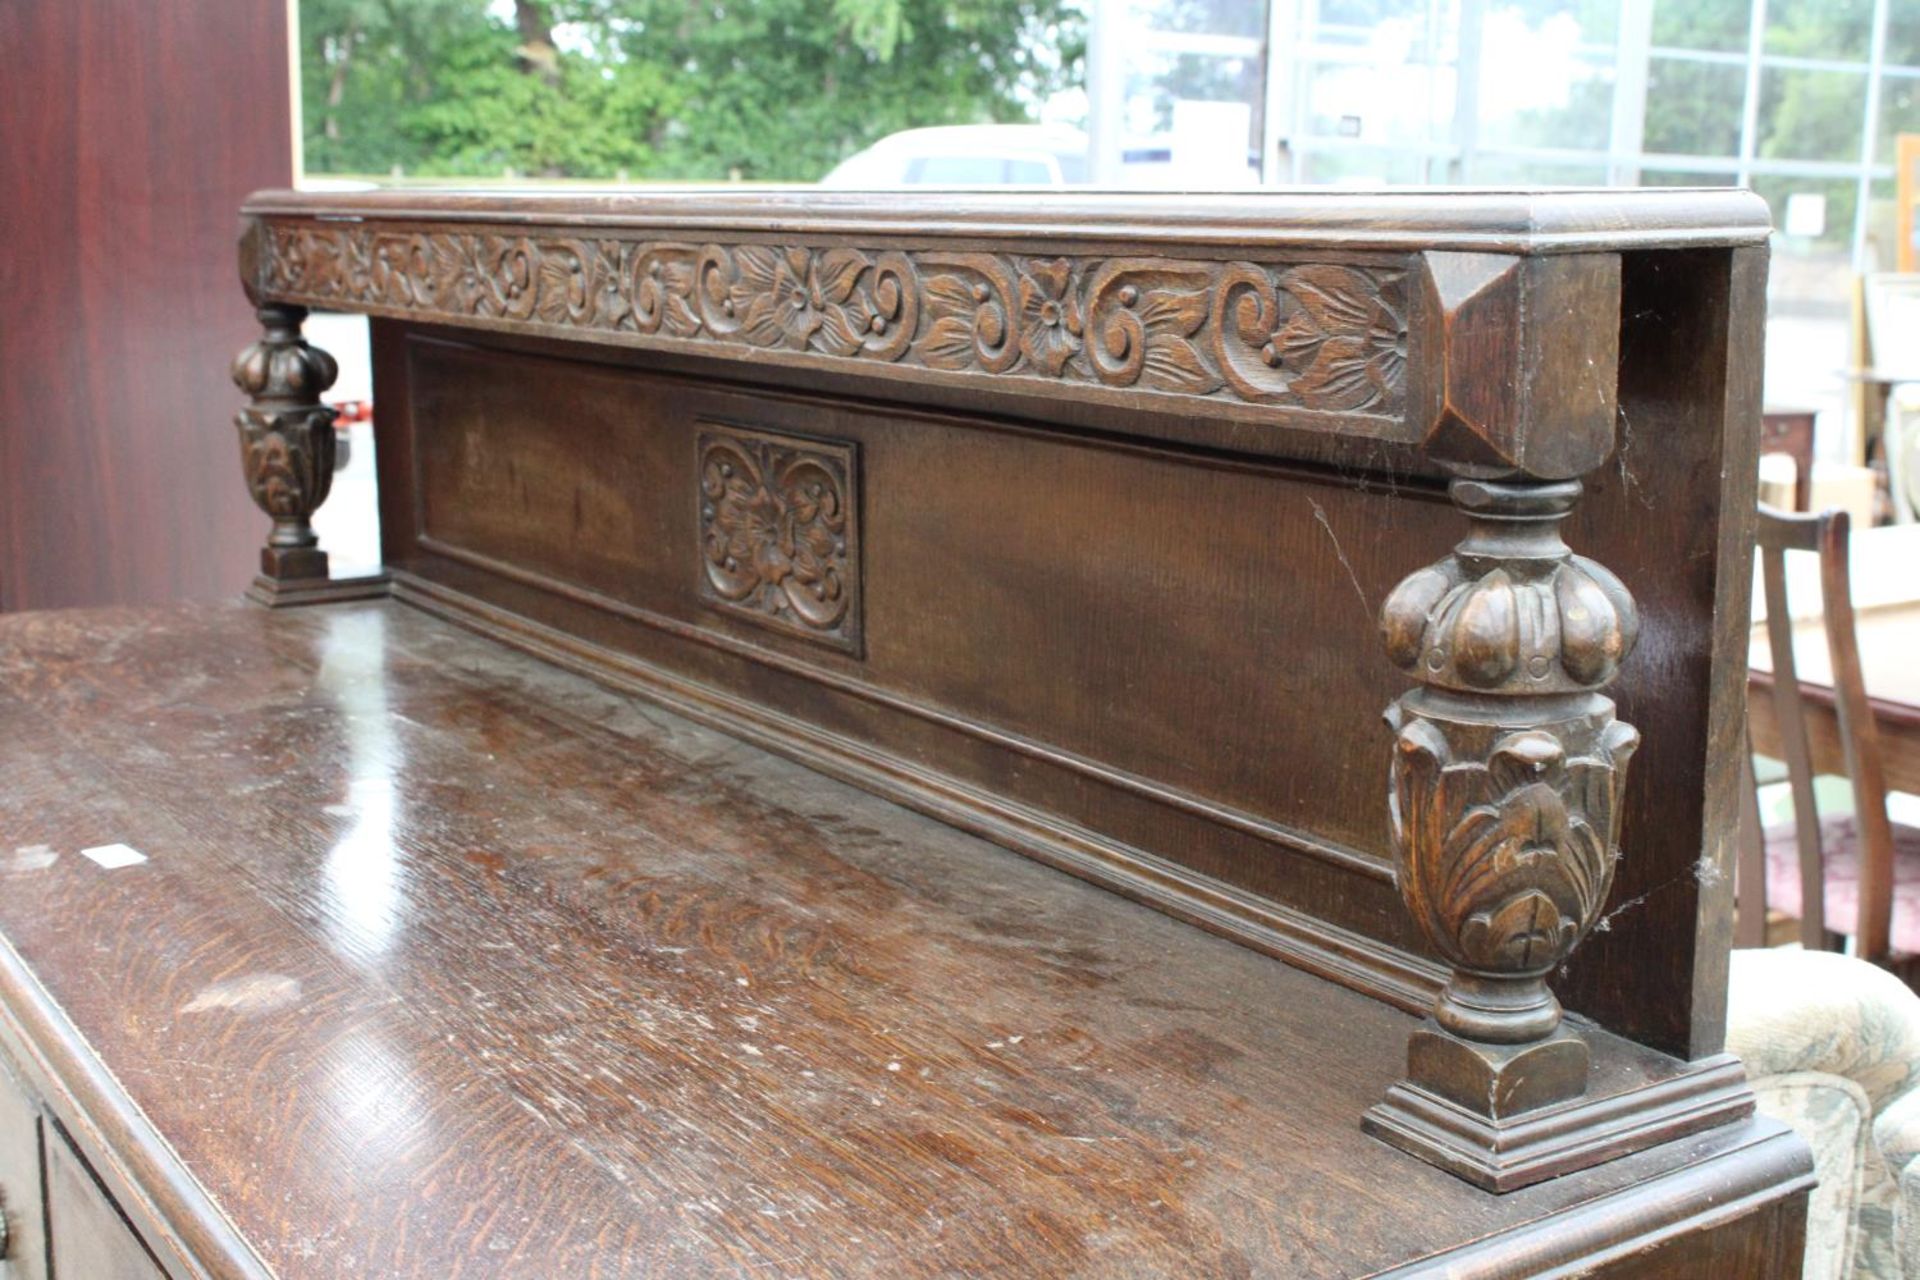 AN EARLY 20TH CENTURY OAK JACOBEAN STYLE SIDEBOARD, 60" WIDE, BEARING A. MARKS & SONS LTD ( - Image 2 of 3